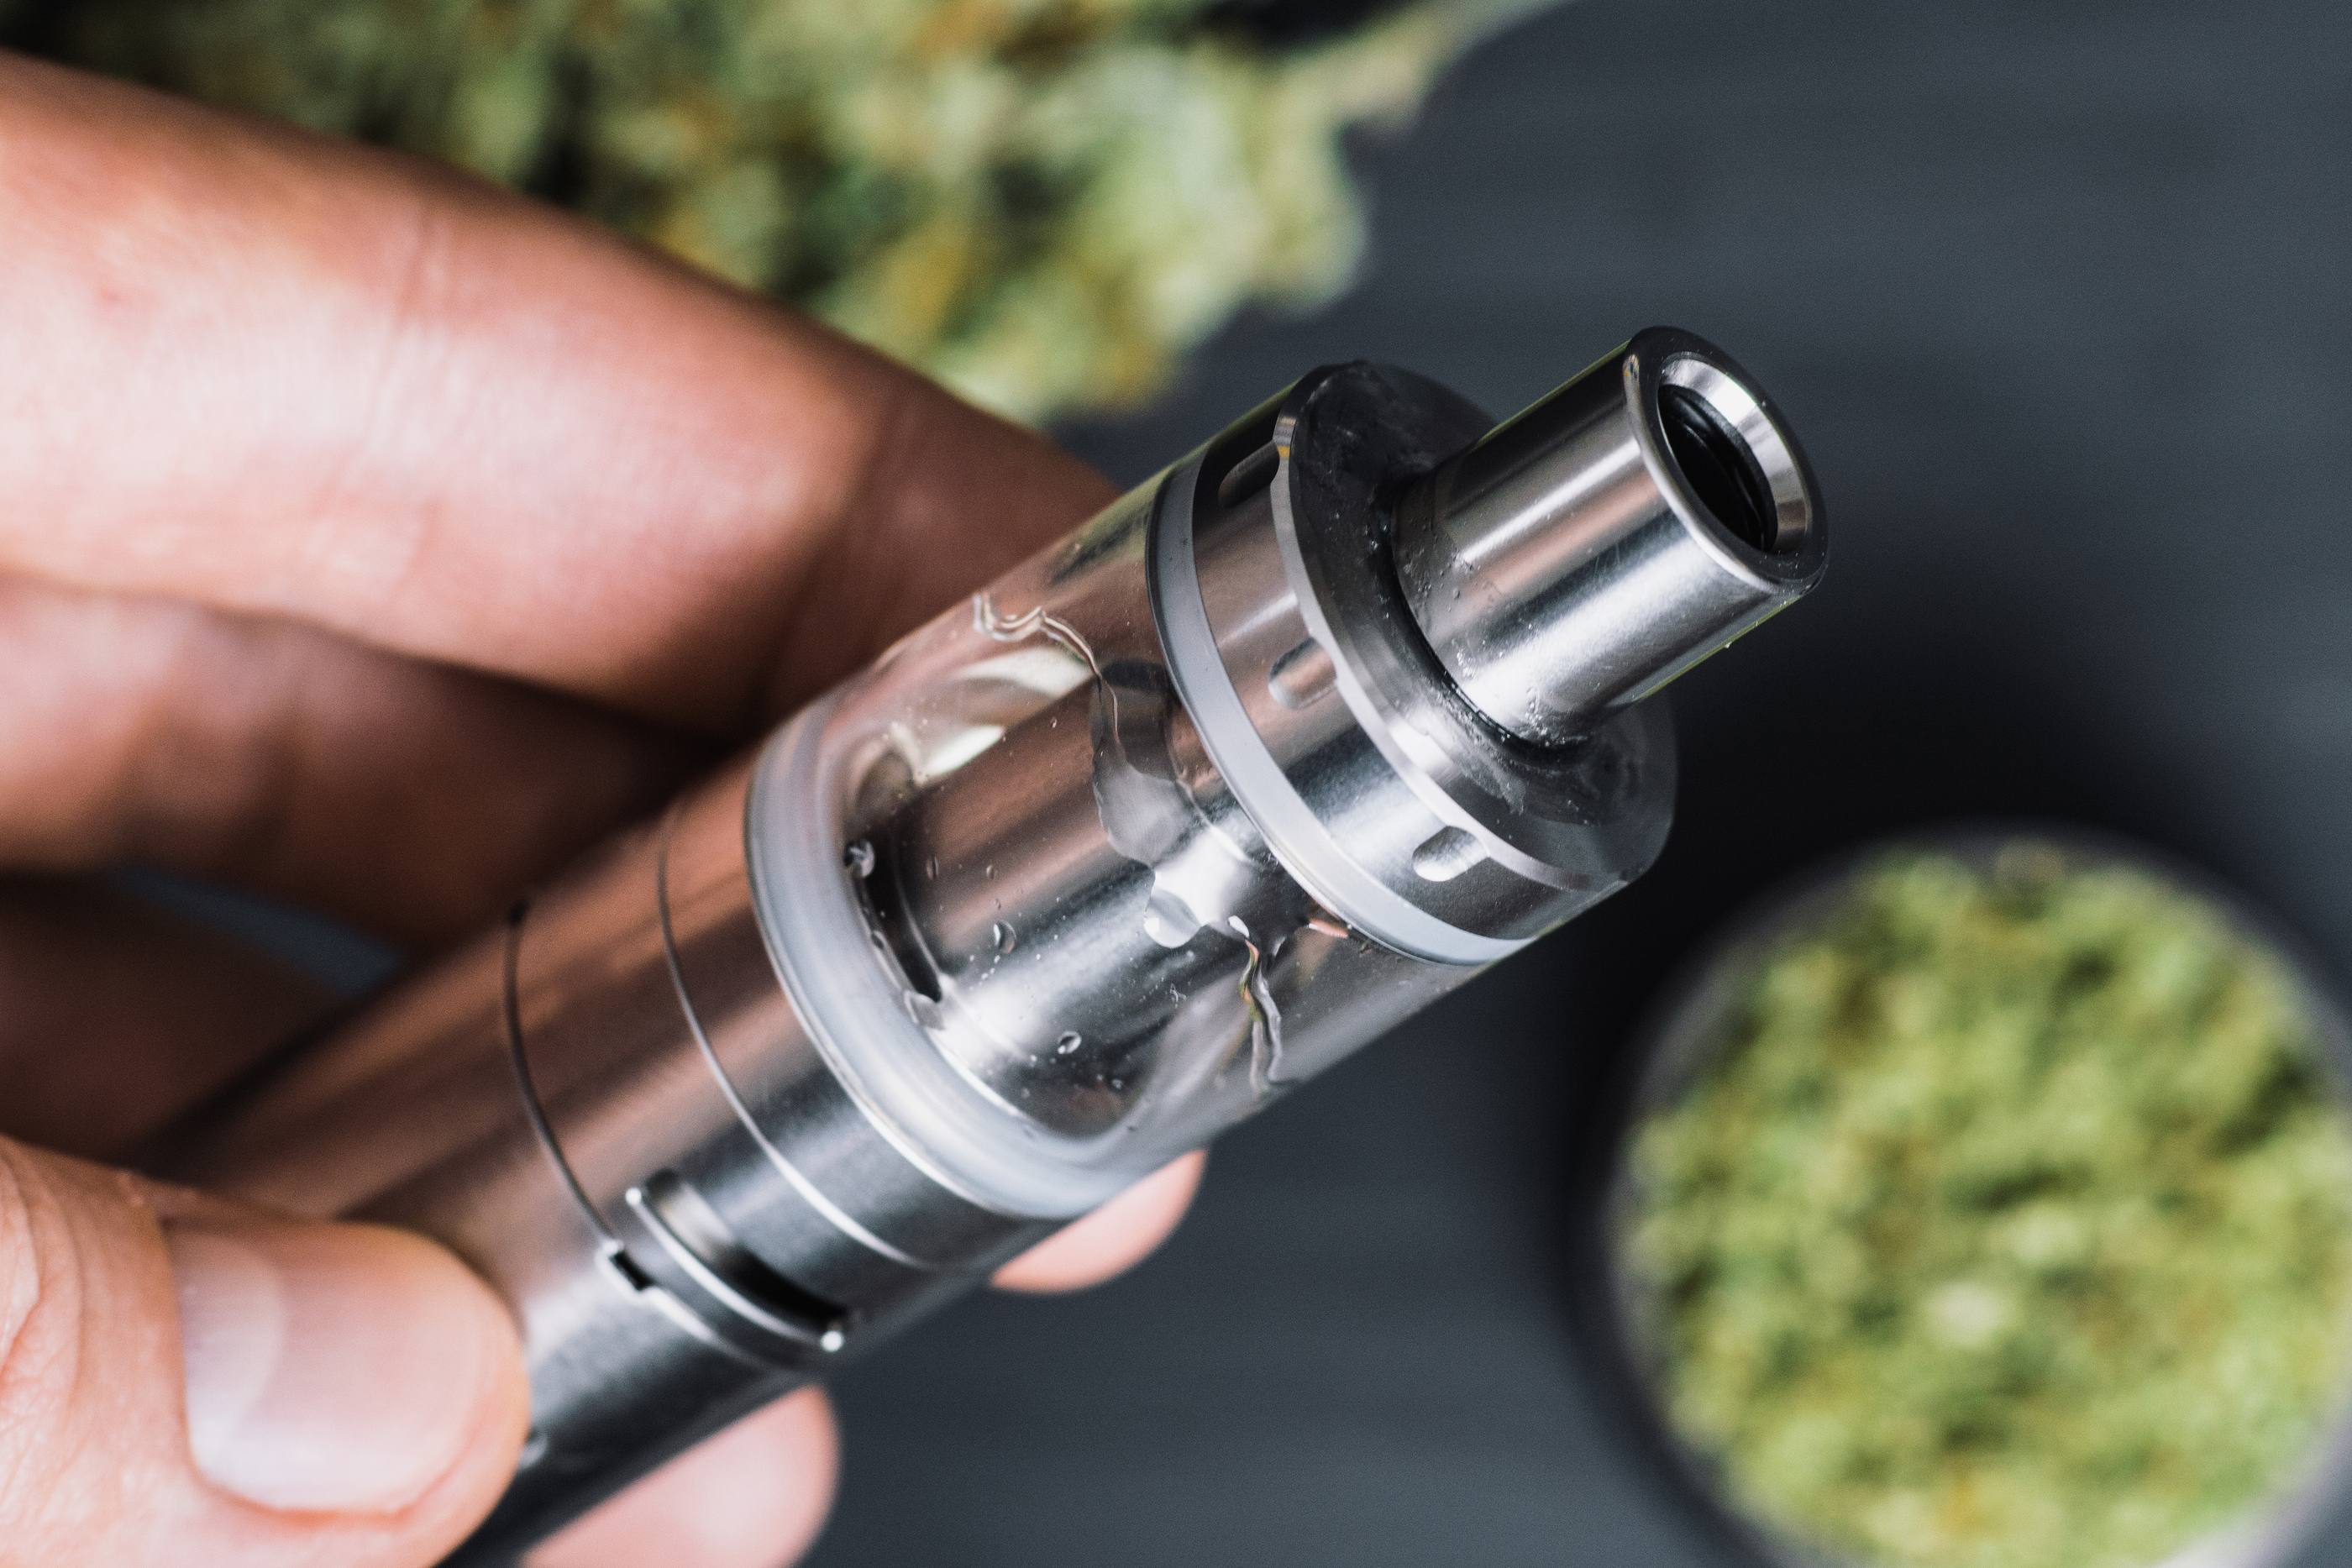 Even Nobel-Winning Chemists Don't Know What's in Your Weed Vape